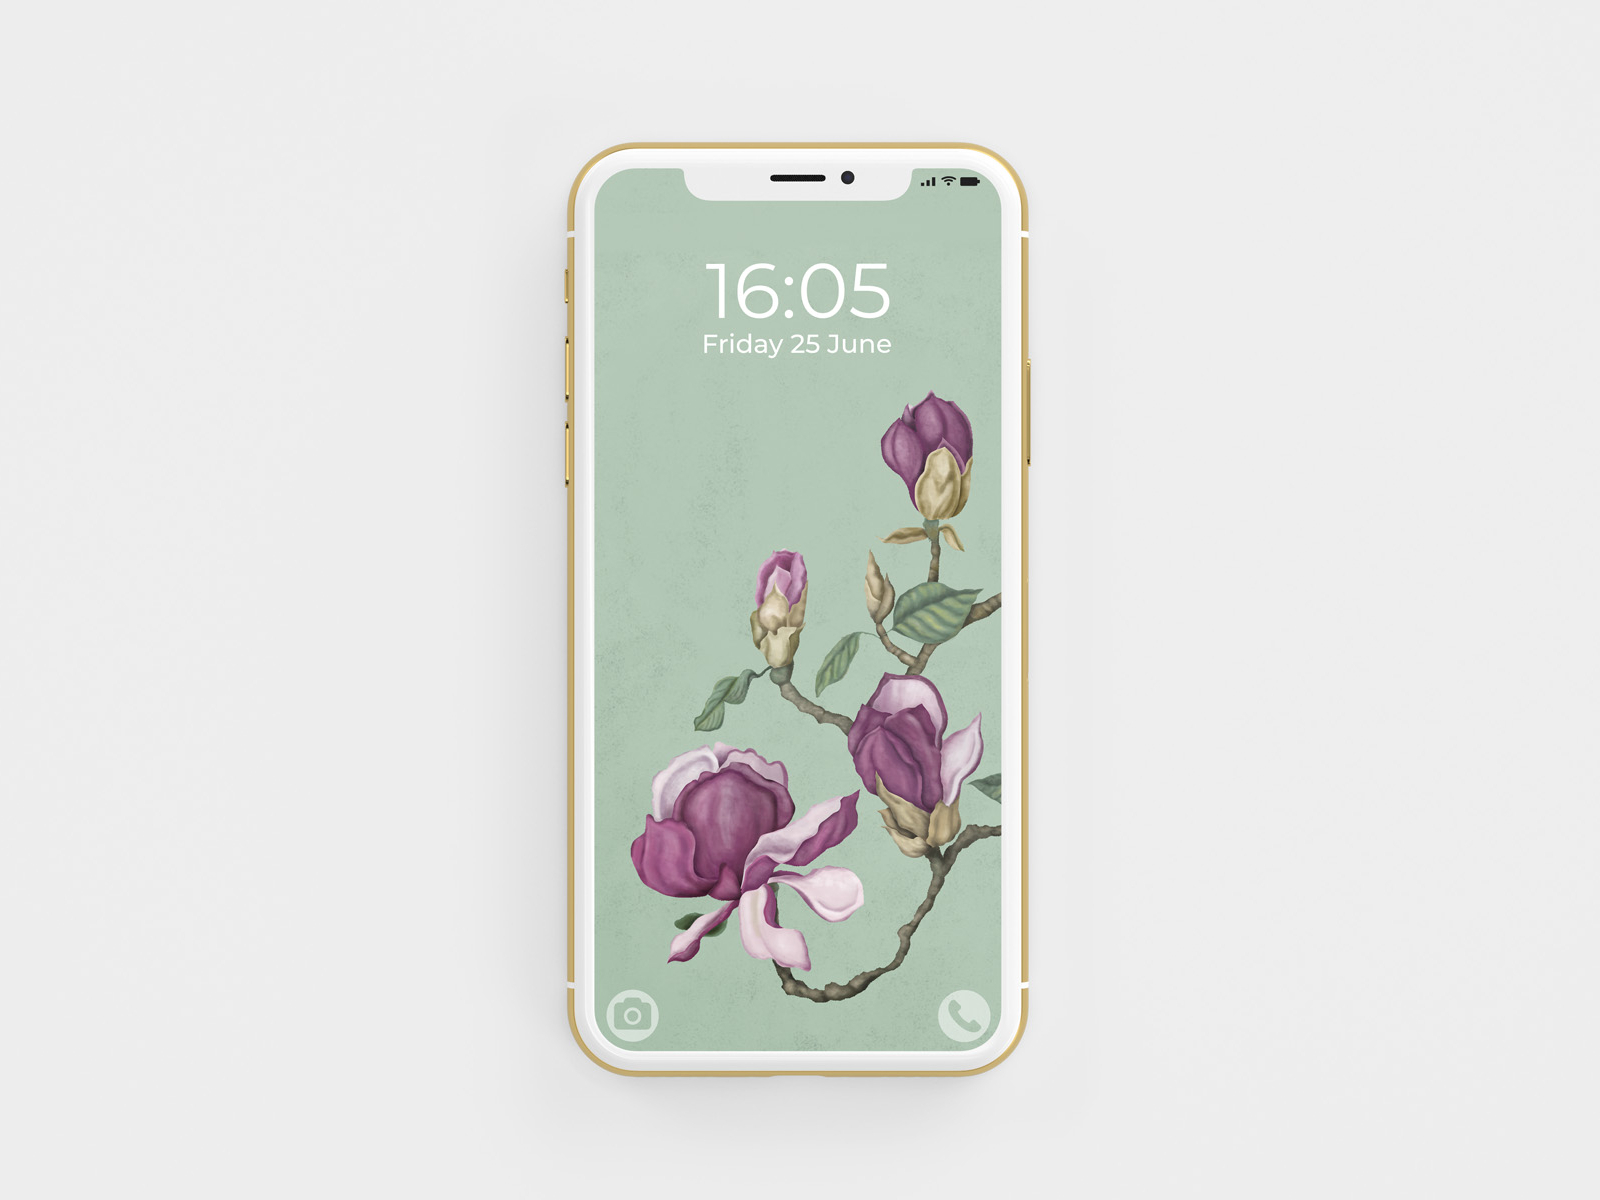 Botanical illustrated wallpaper for iPhone by Raquel Feria Legrand on ...